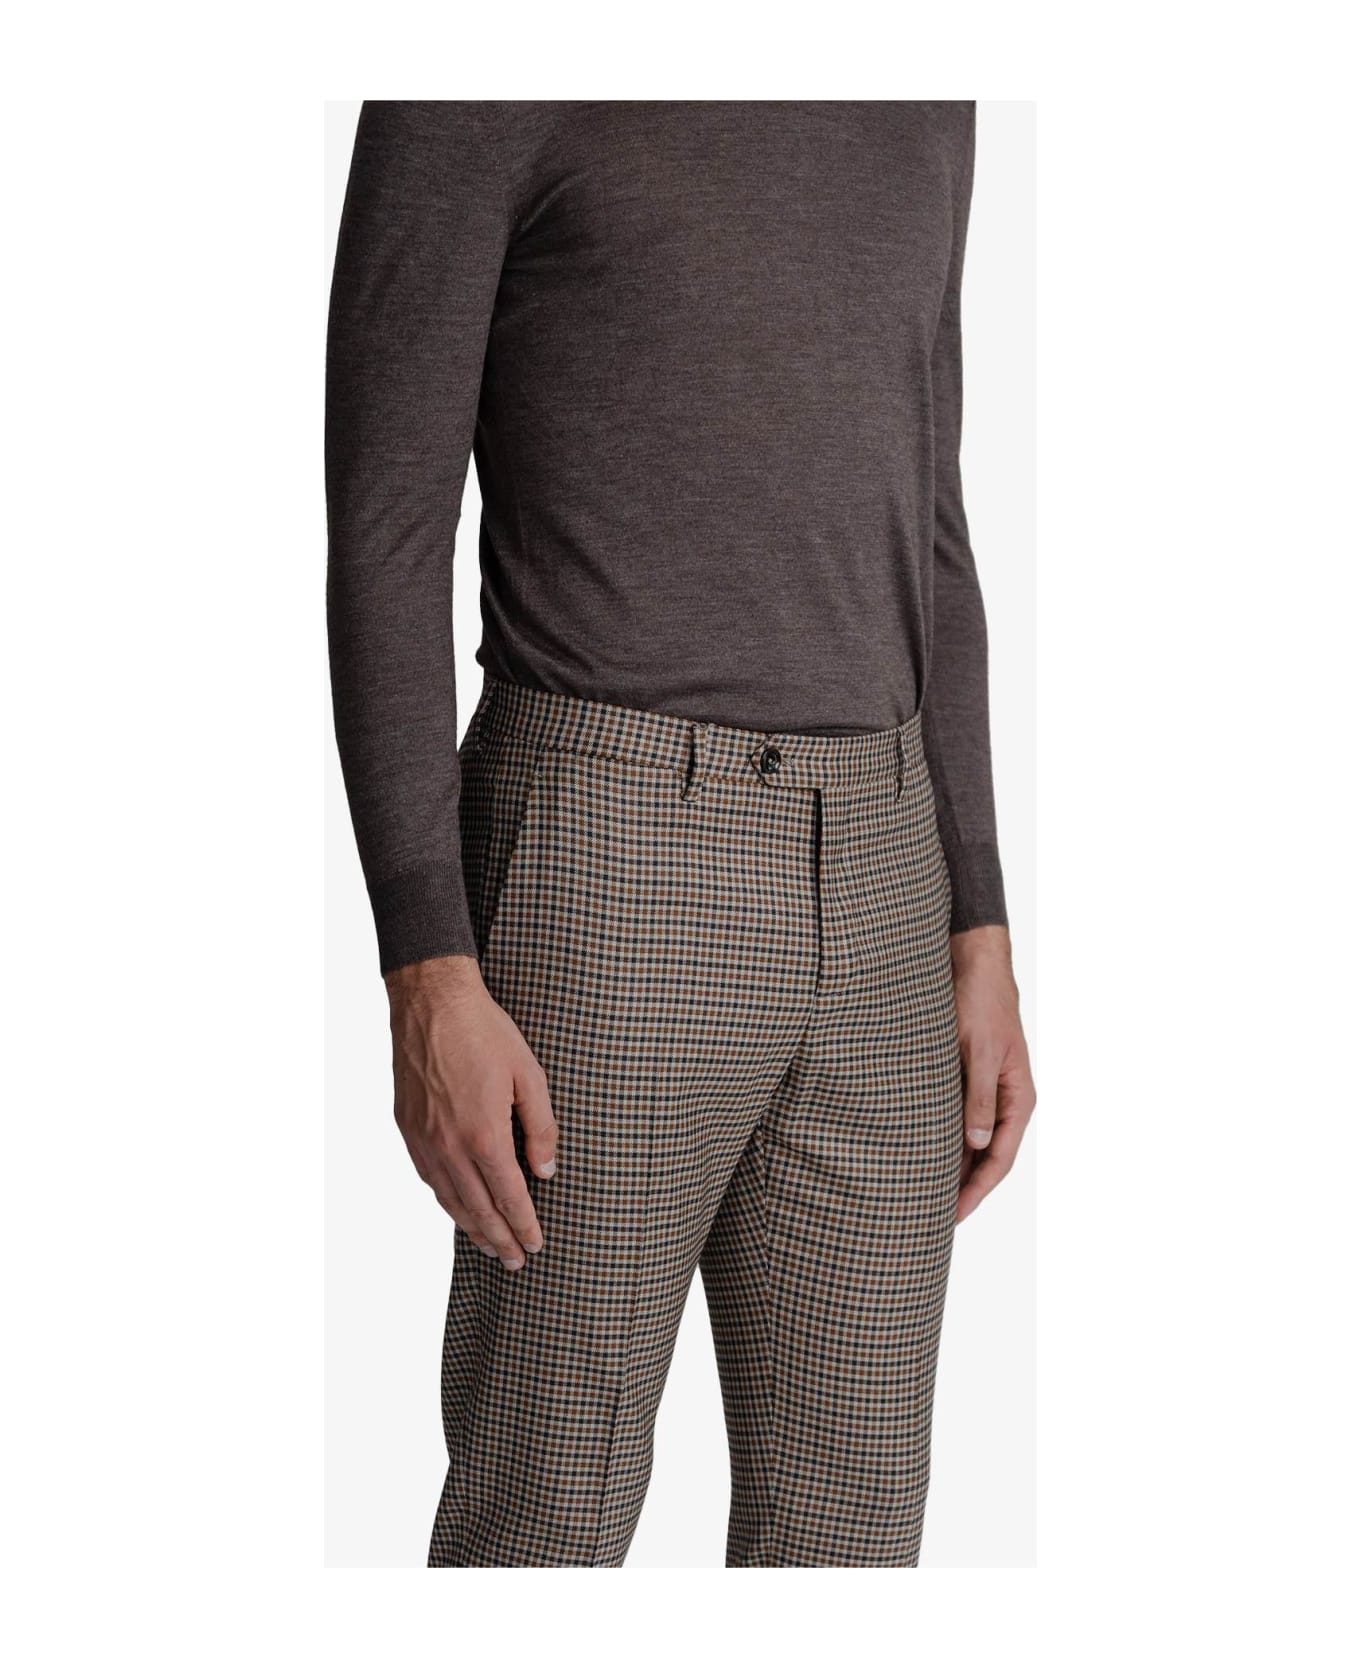 Larusmiani Trousers 'checked' Pants - Brown